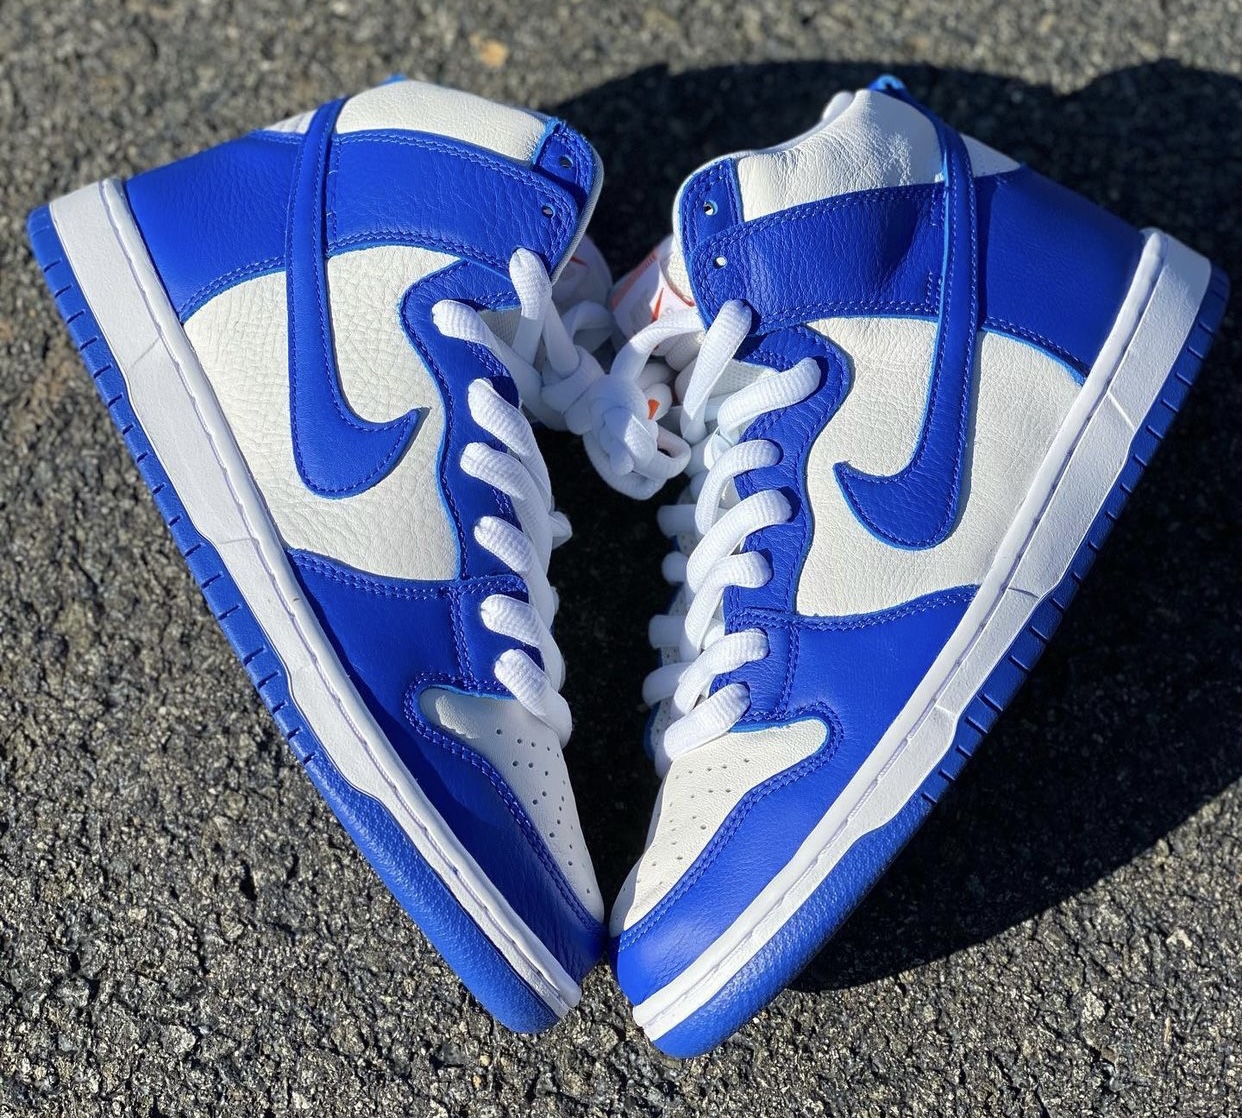 Nike SB Dunk High Pro ISO Kentucky Blue White DH7149-400 Release 